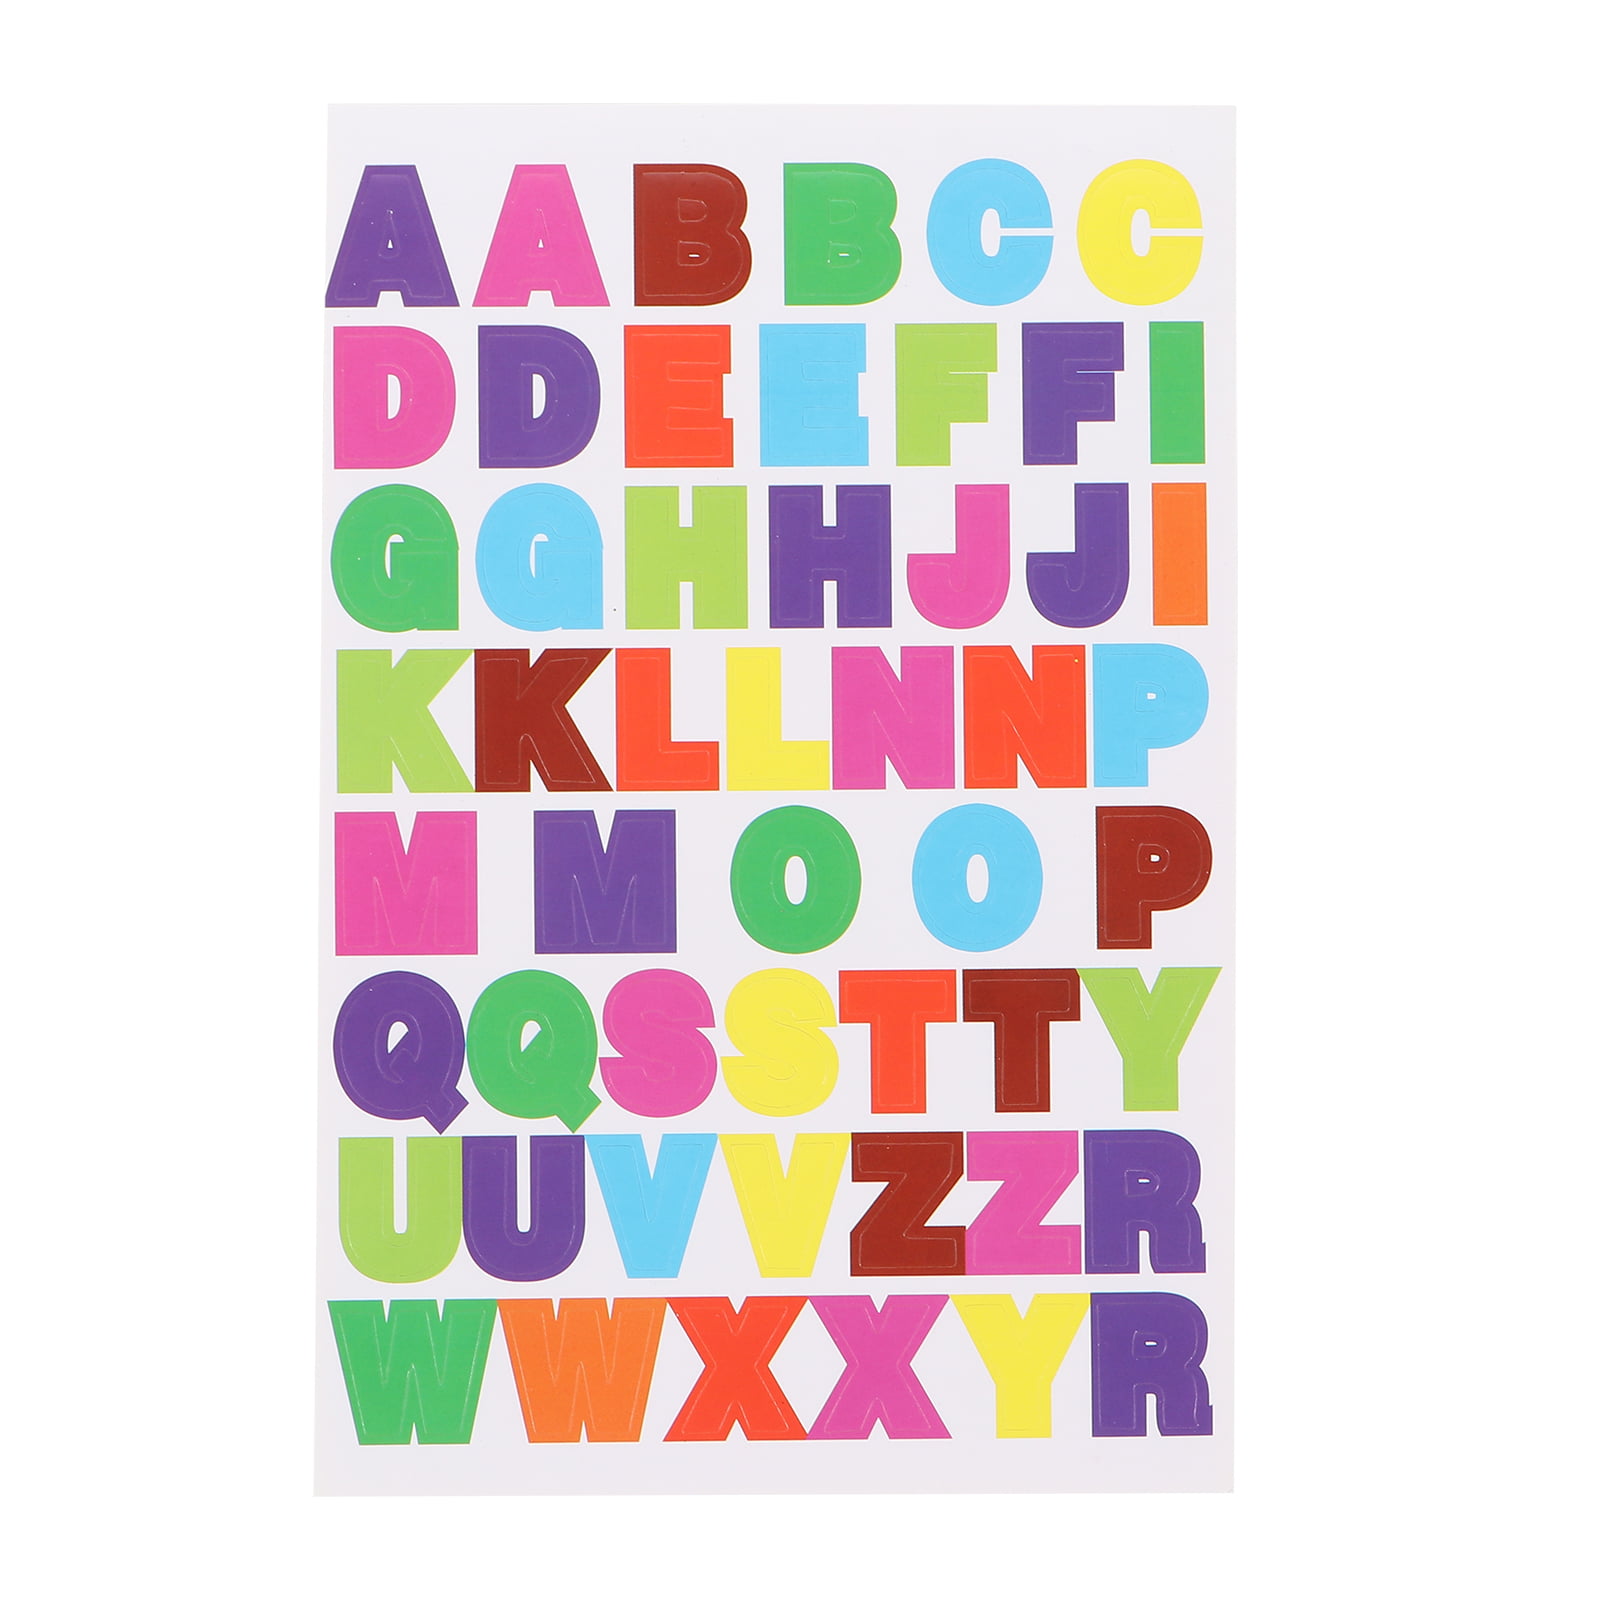  Ciieeo 5pcs tag Stickers Decor Scrapbook Number Decals Letters  for Crafts Letter Decals Alphabet Decals Numbers Sticker Name Sticker Label  Combination Child Portfolio Handwriting : Office Products